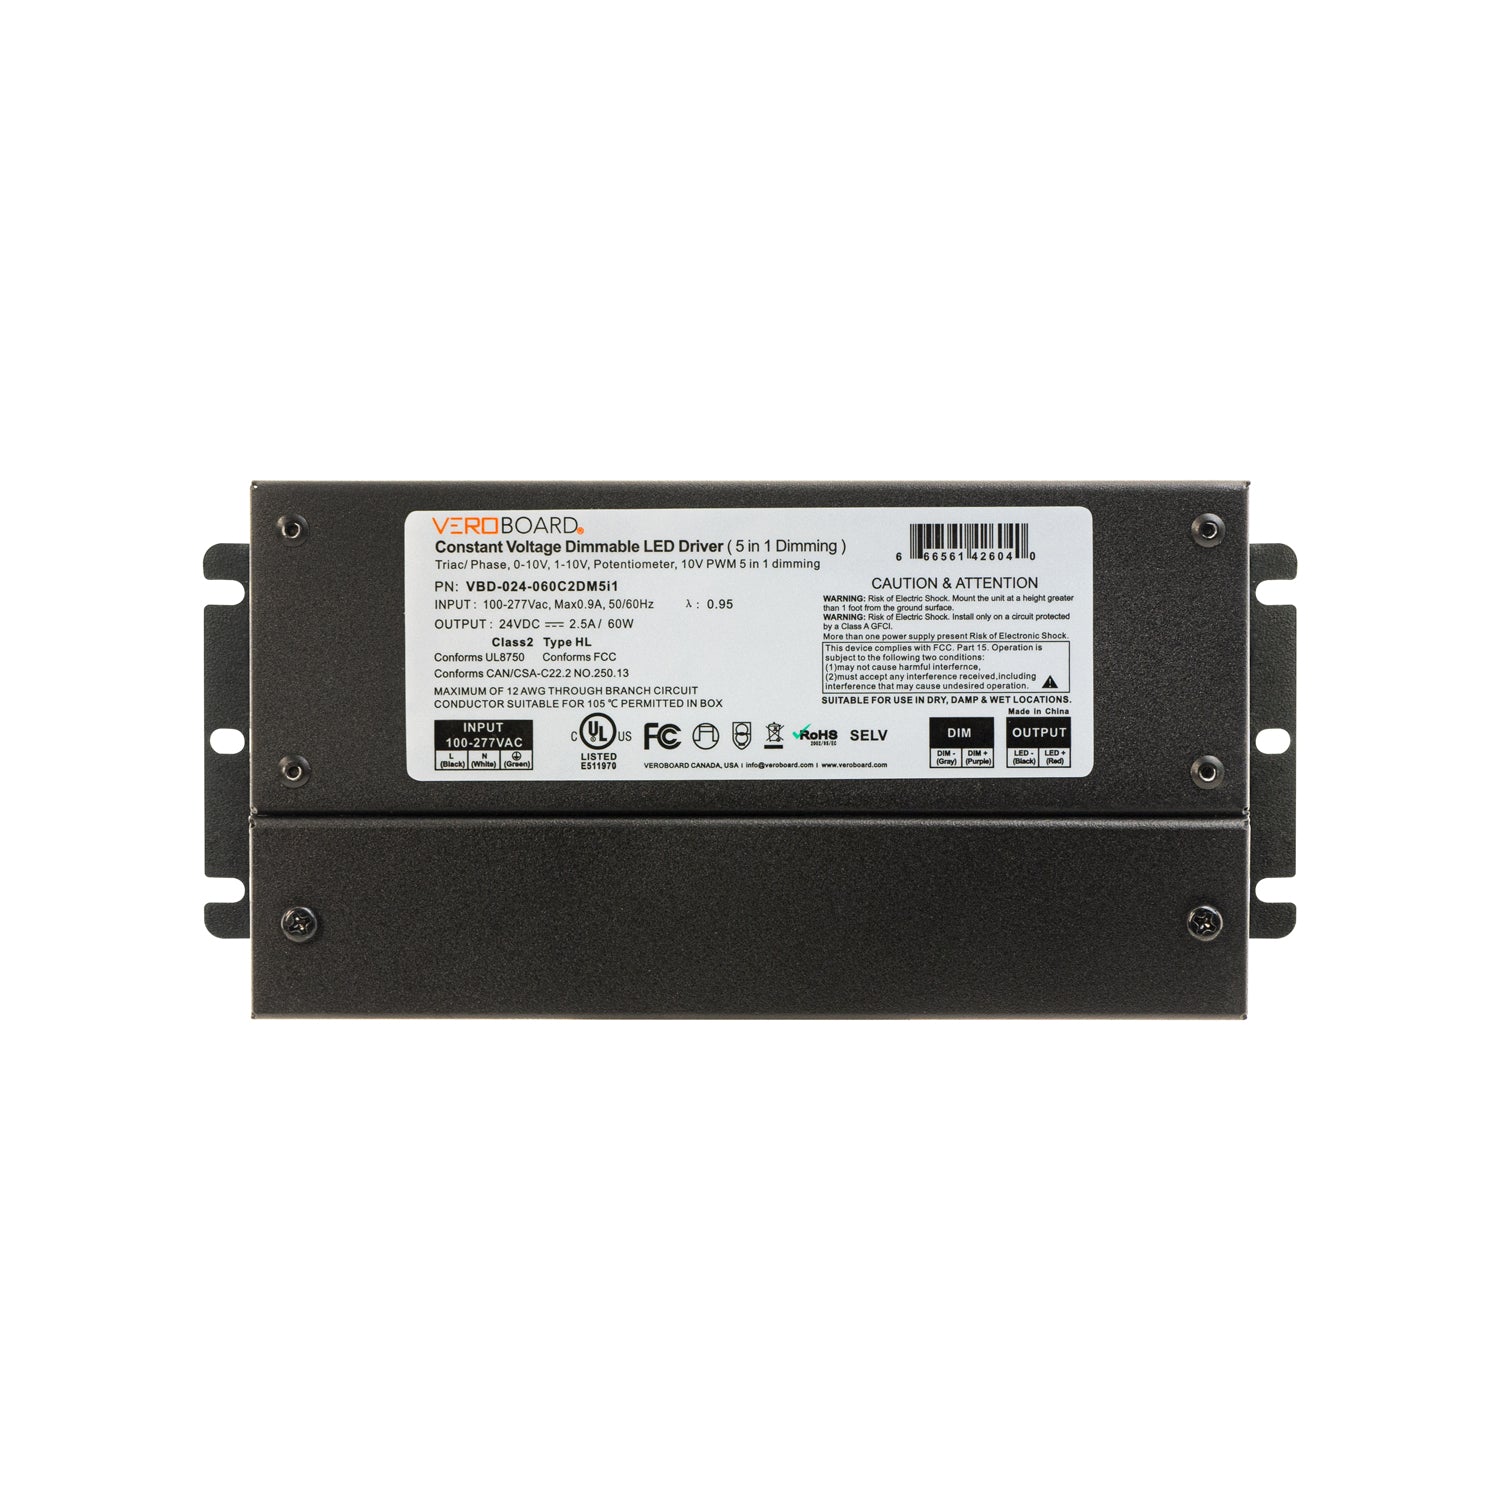 VBD-024-060C2DM5i1 Constant Voltage Dimmable Driver (5 in 1), Veroboard